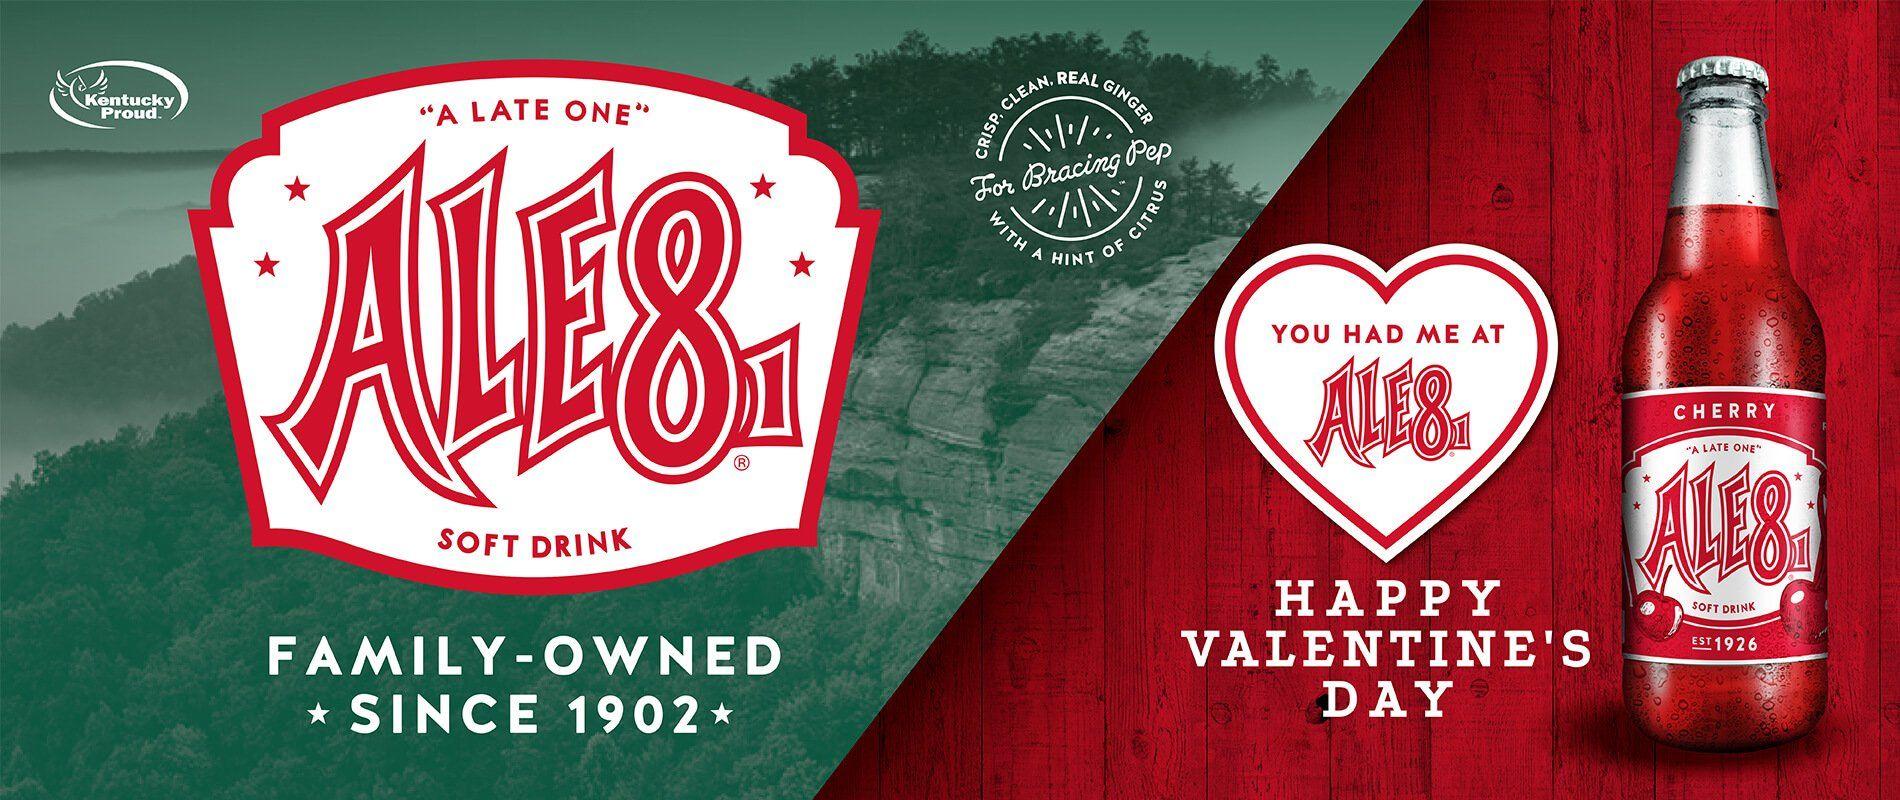 Ale 8 Logo - Ale-8-One Bottling Company - Winchester, KY - One Sip & You're There